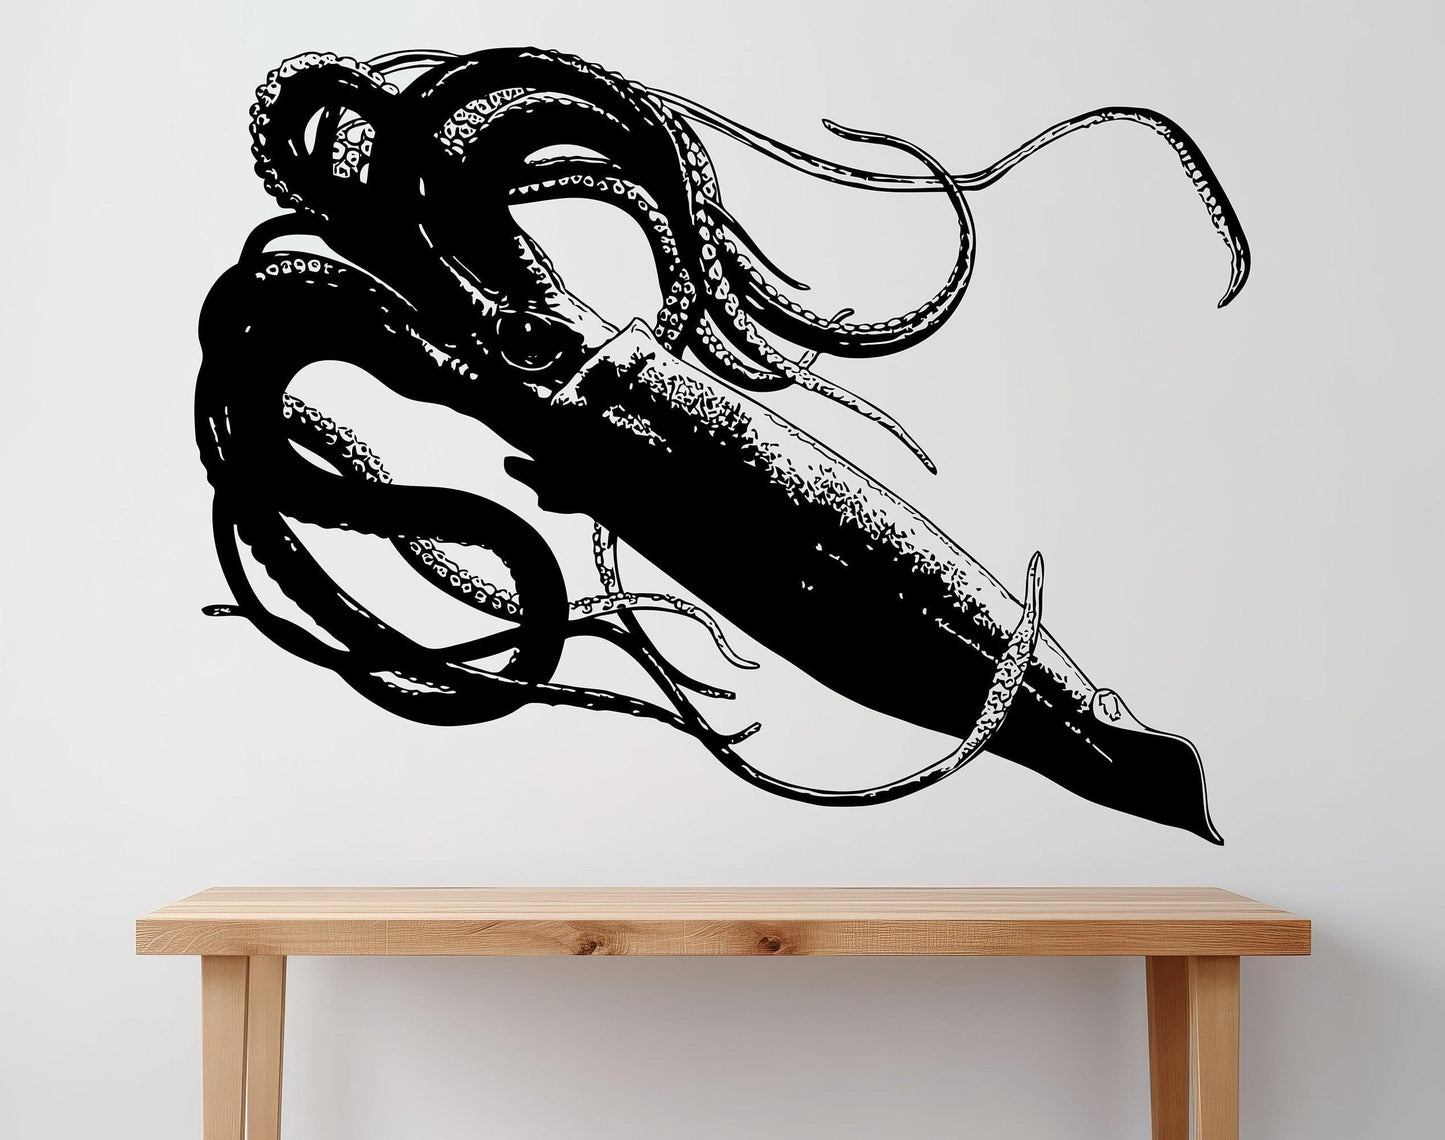 Giant Squid Wall Decal Sticker. #5336